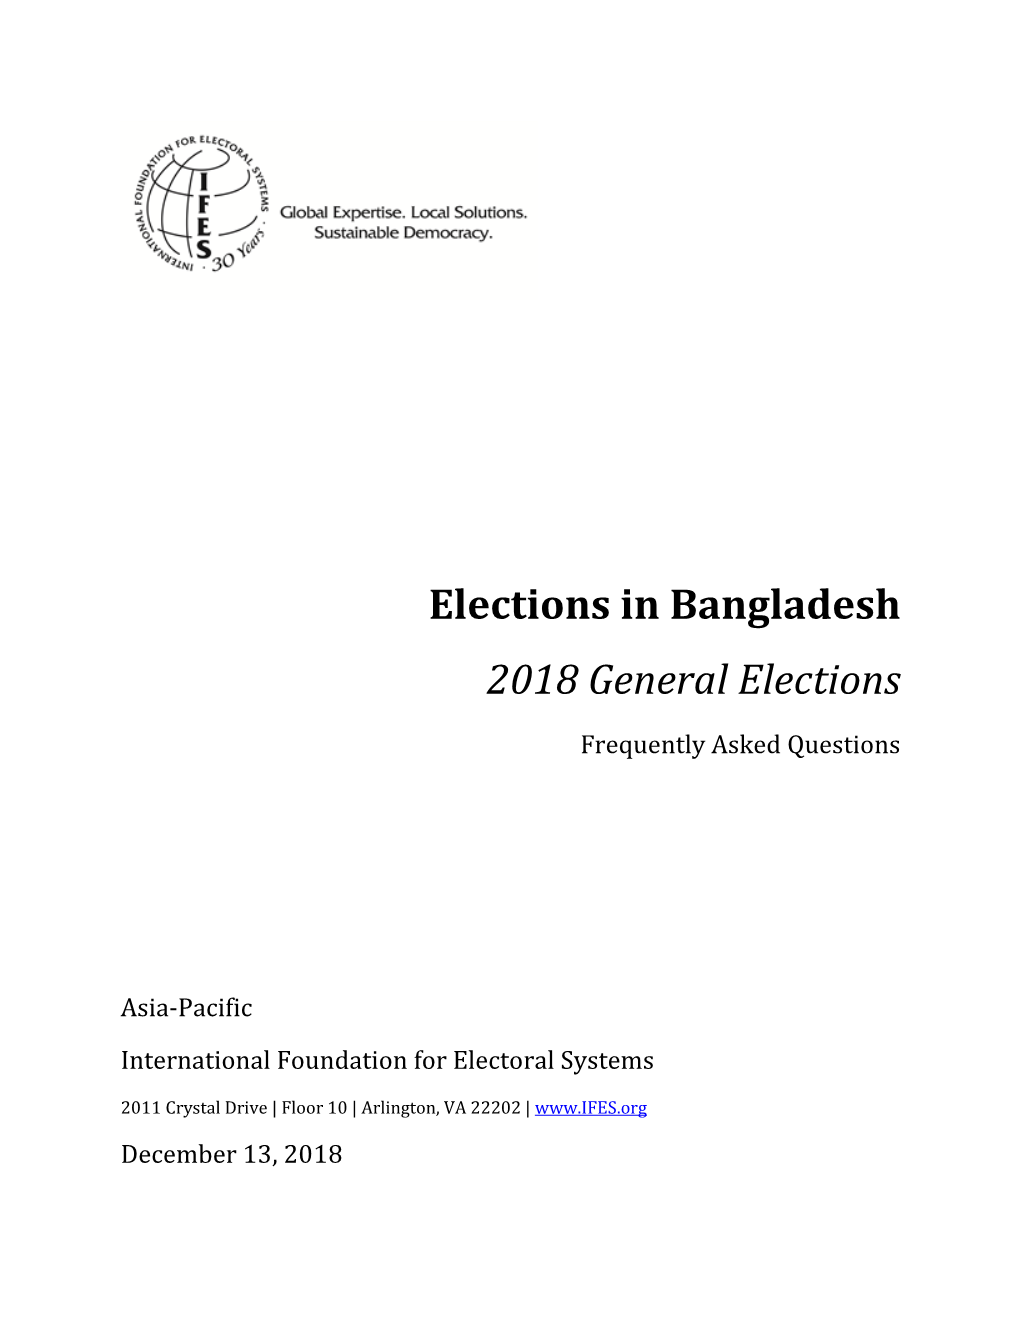 Elections in Bangladesh 2018 General Elections